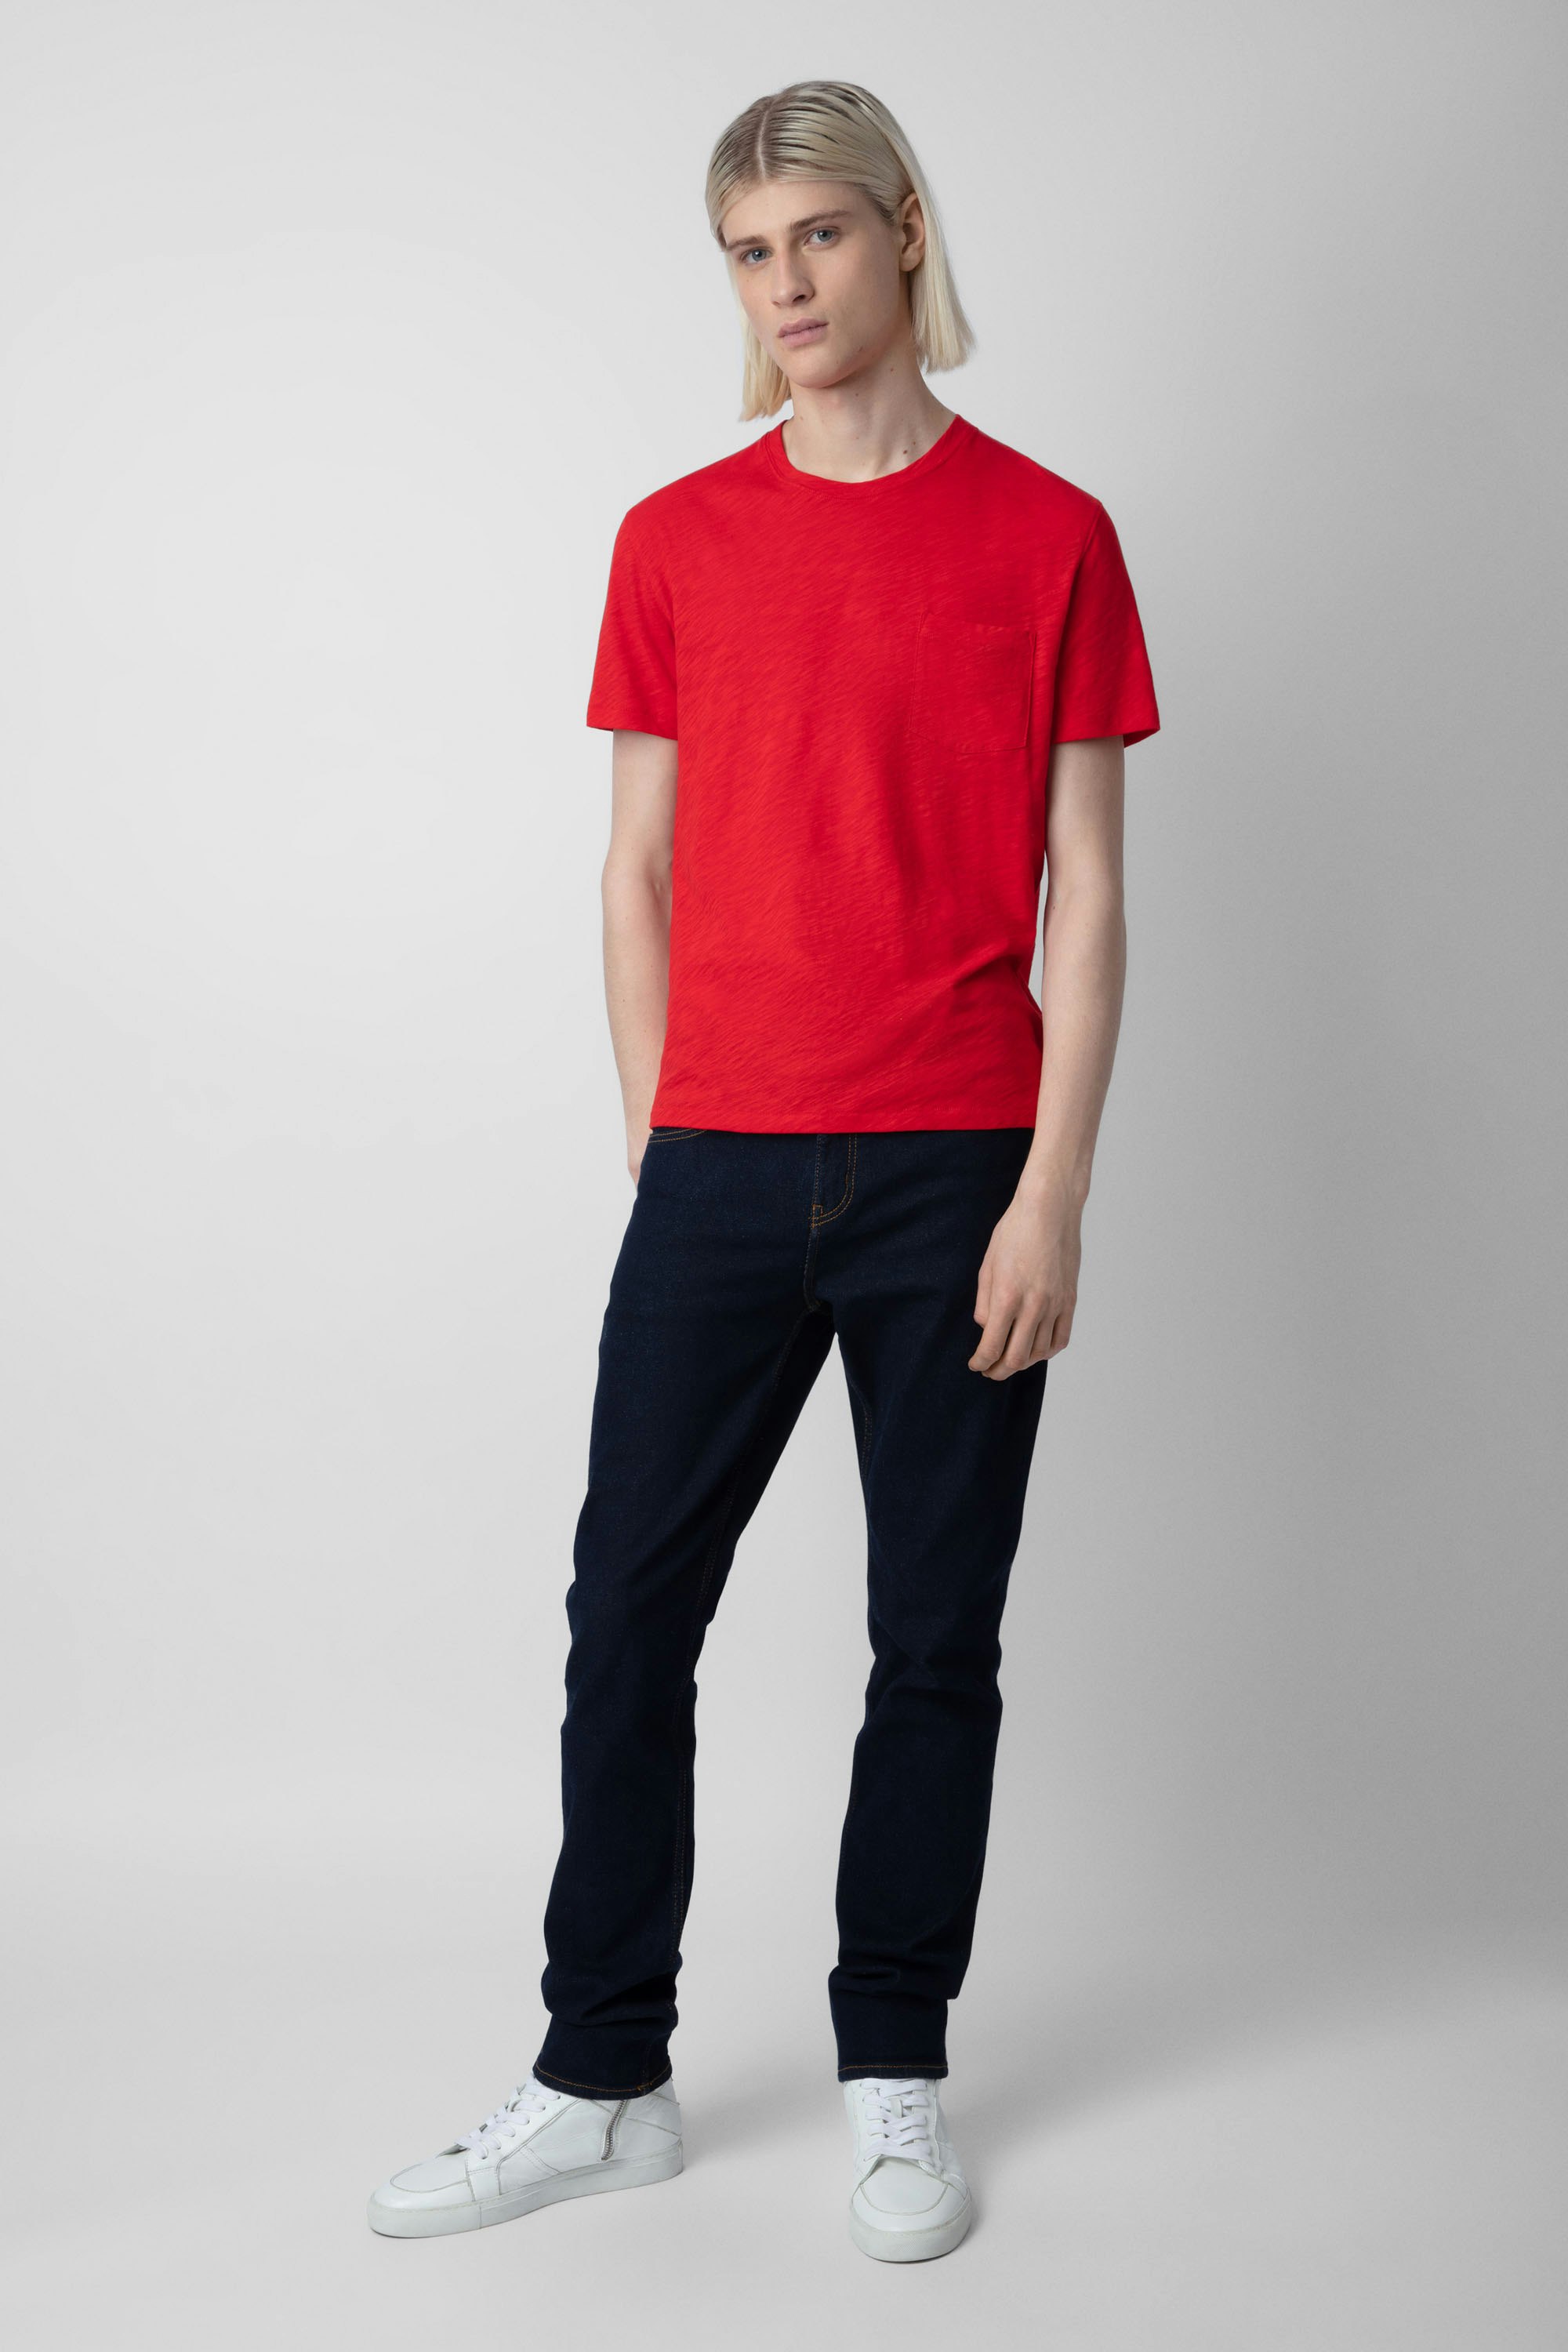 Stockholm Ｔシャツ - Men’s red slub cotton T-shirt with a chest pocket and Skull motif on the back.